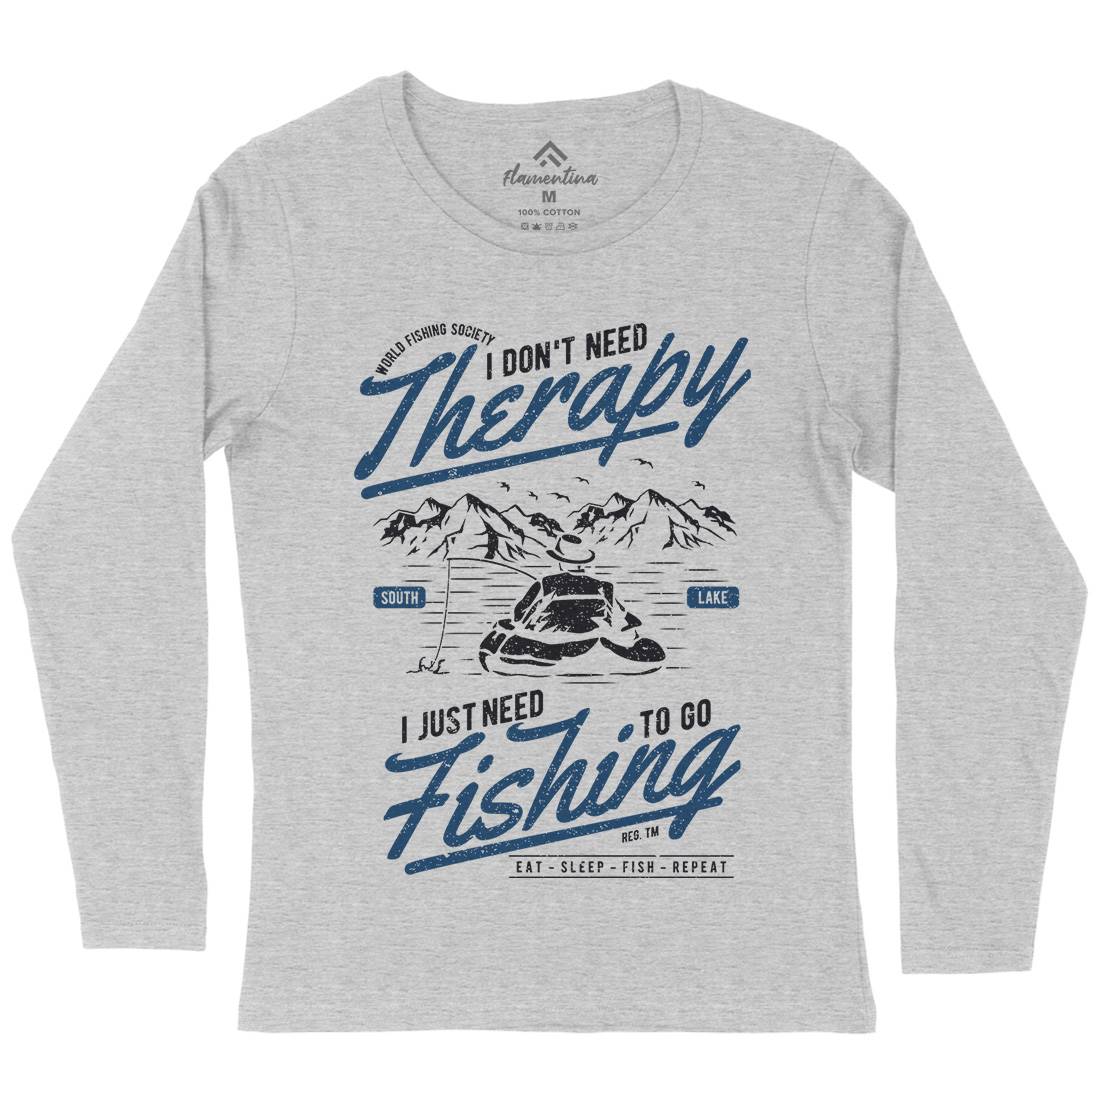 Therapy Womens Long Sleeve T-Shirt Fishing A662